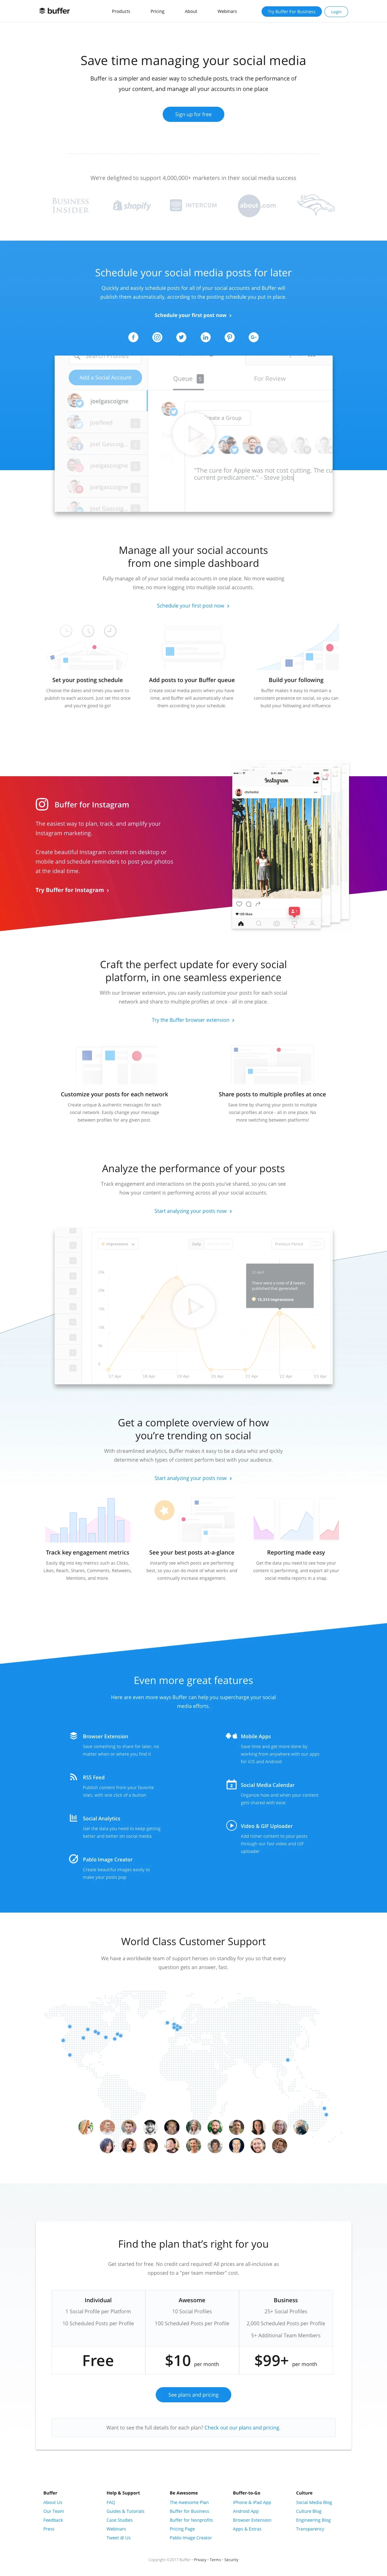 Buffer Landing Page Example: Buffer is a simpler and easier way to schedule posts, track the performance of your content, and manage all your accounts in one place